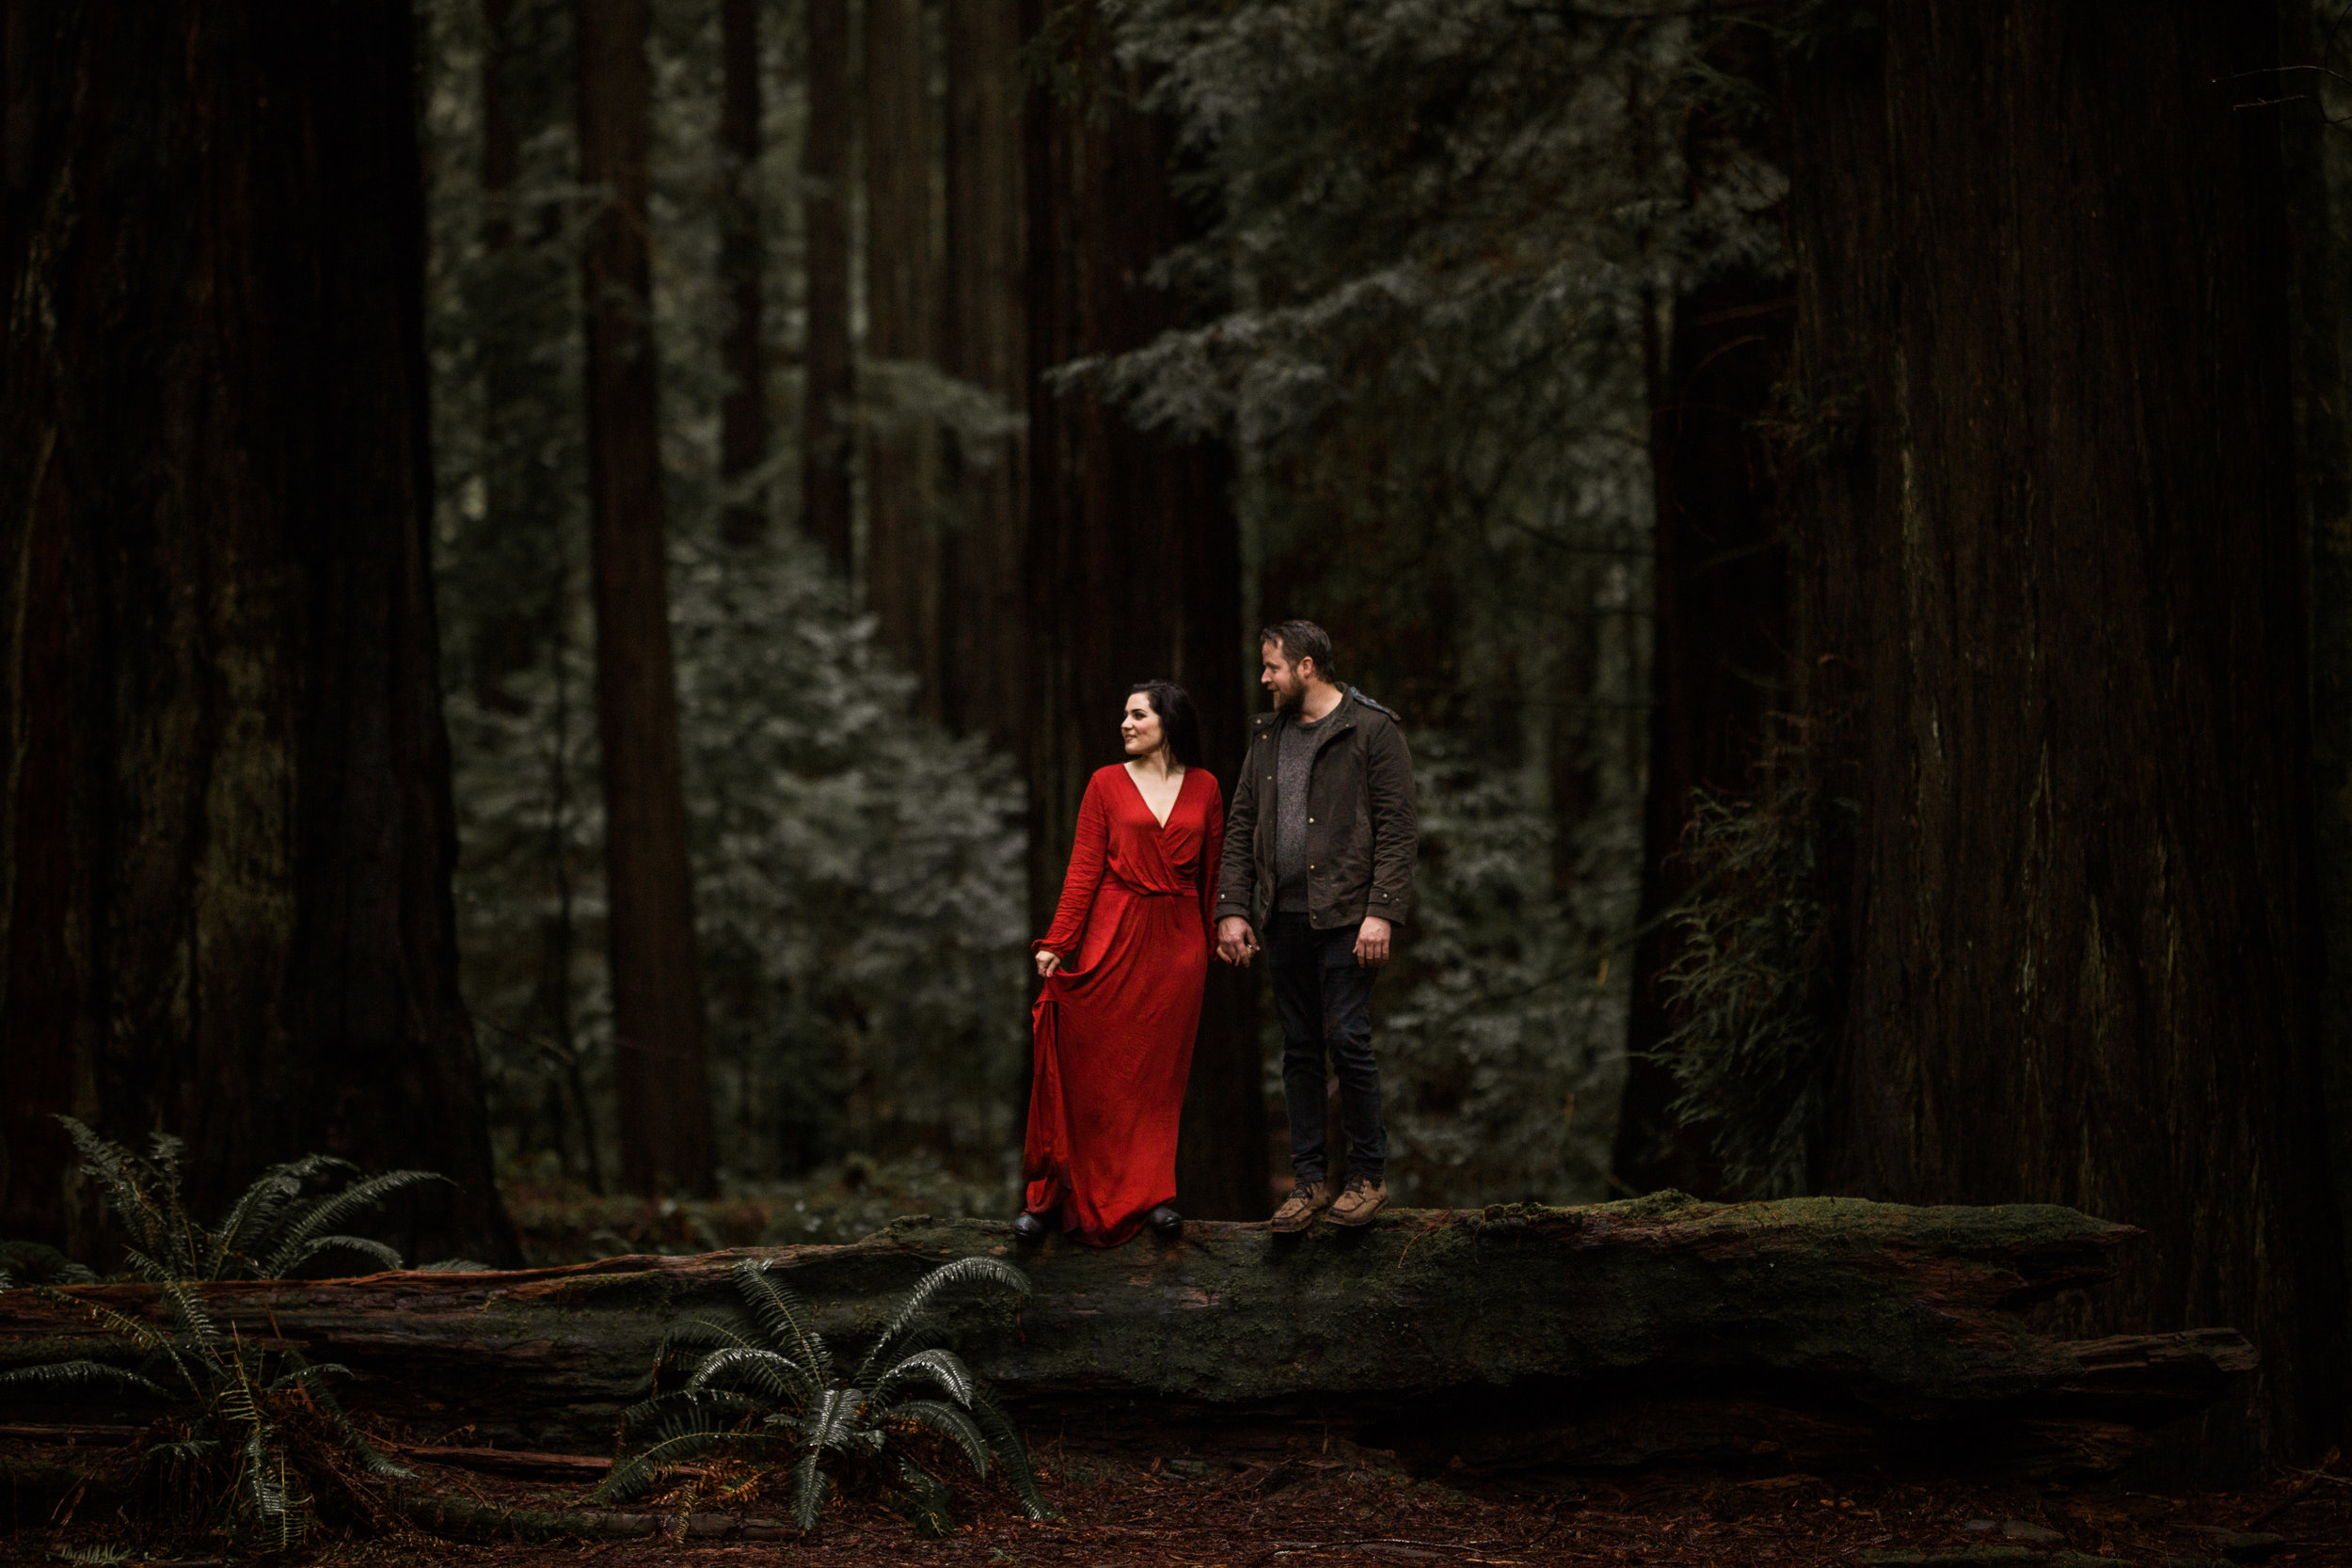 nicole-daacke-photography-redwoods-national-park-forest-rainy-foggy-adventure-engagement-session-humboldt-county-old-growth-redwood-tree-elopement-intimate-wedding-photographer-57.jpg